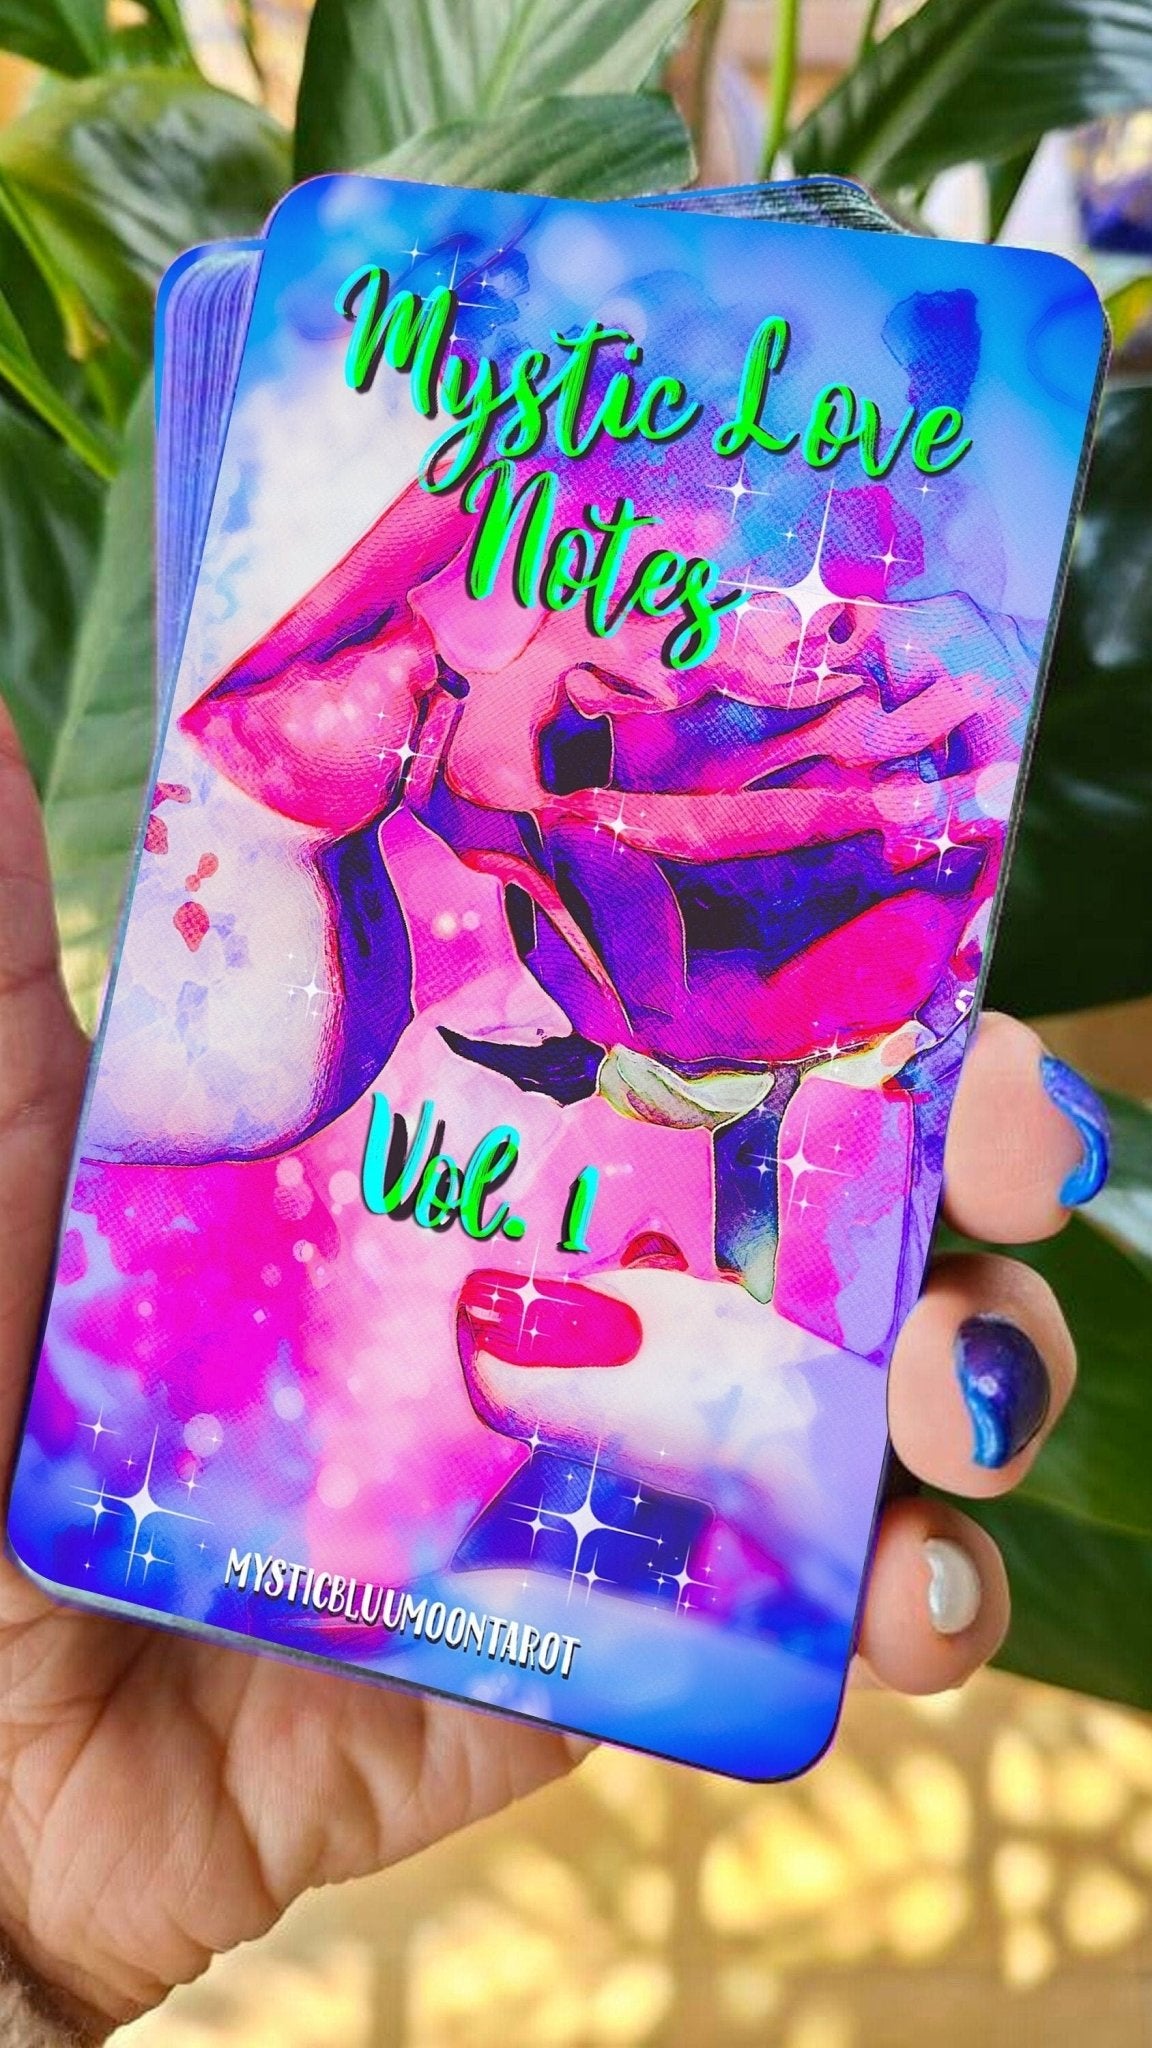 Mystic Notes Oracle Deck Situations Deck Tarot Deck Twin Flame Deck Love Oracle Deck Messages Deck Oracle Card Deck - MysticBluuMoonTarot